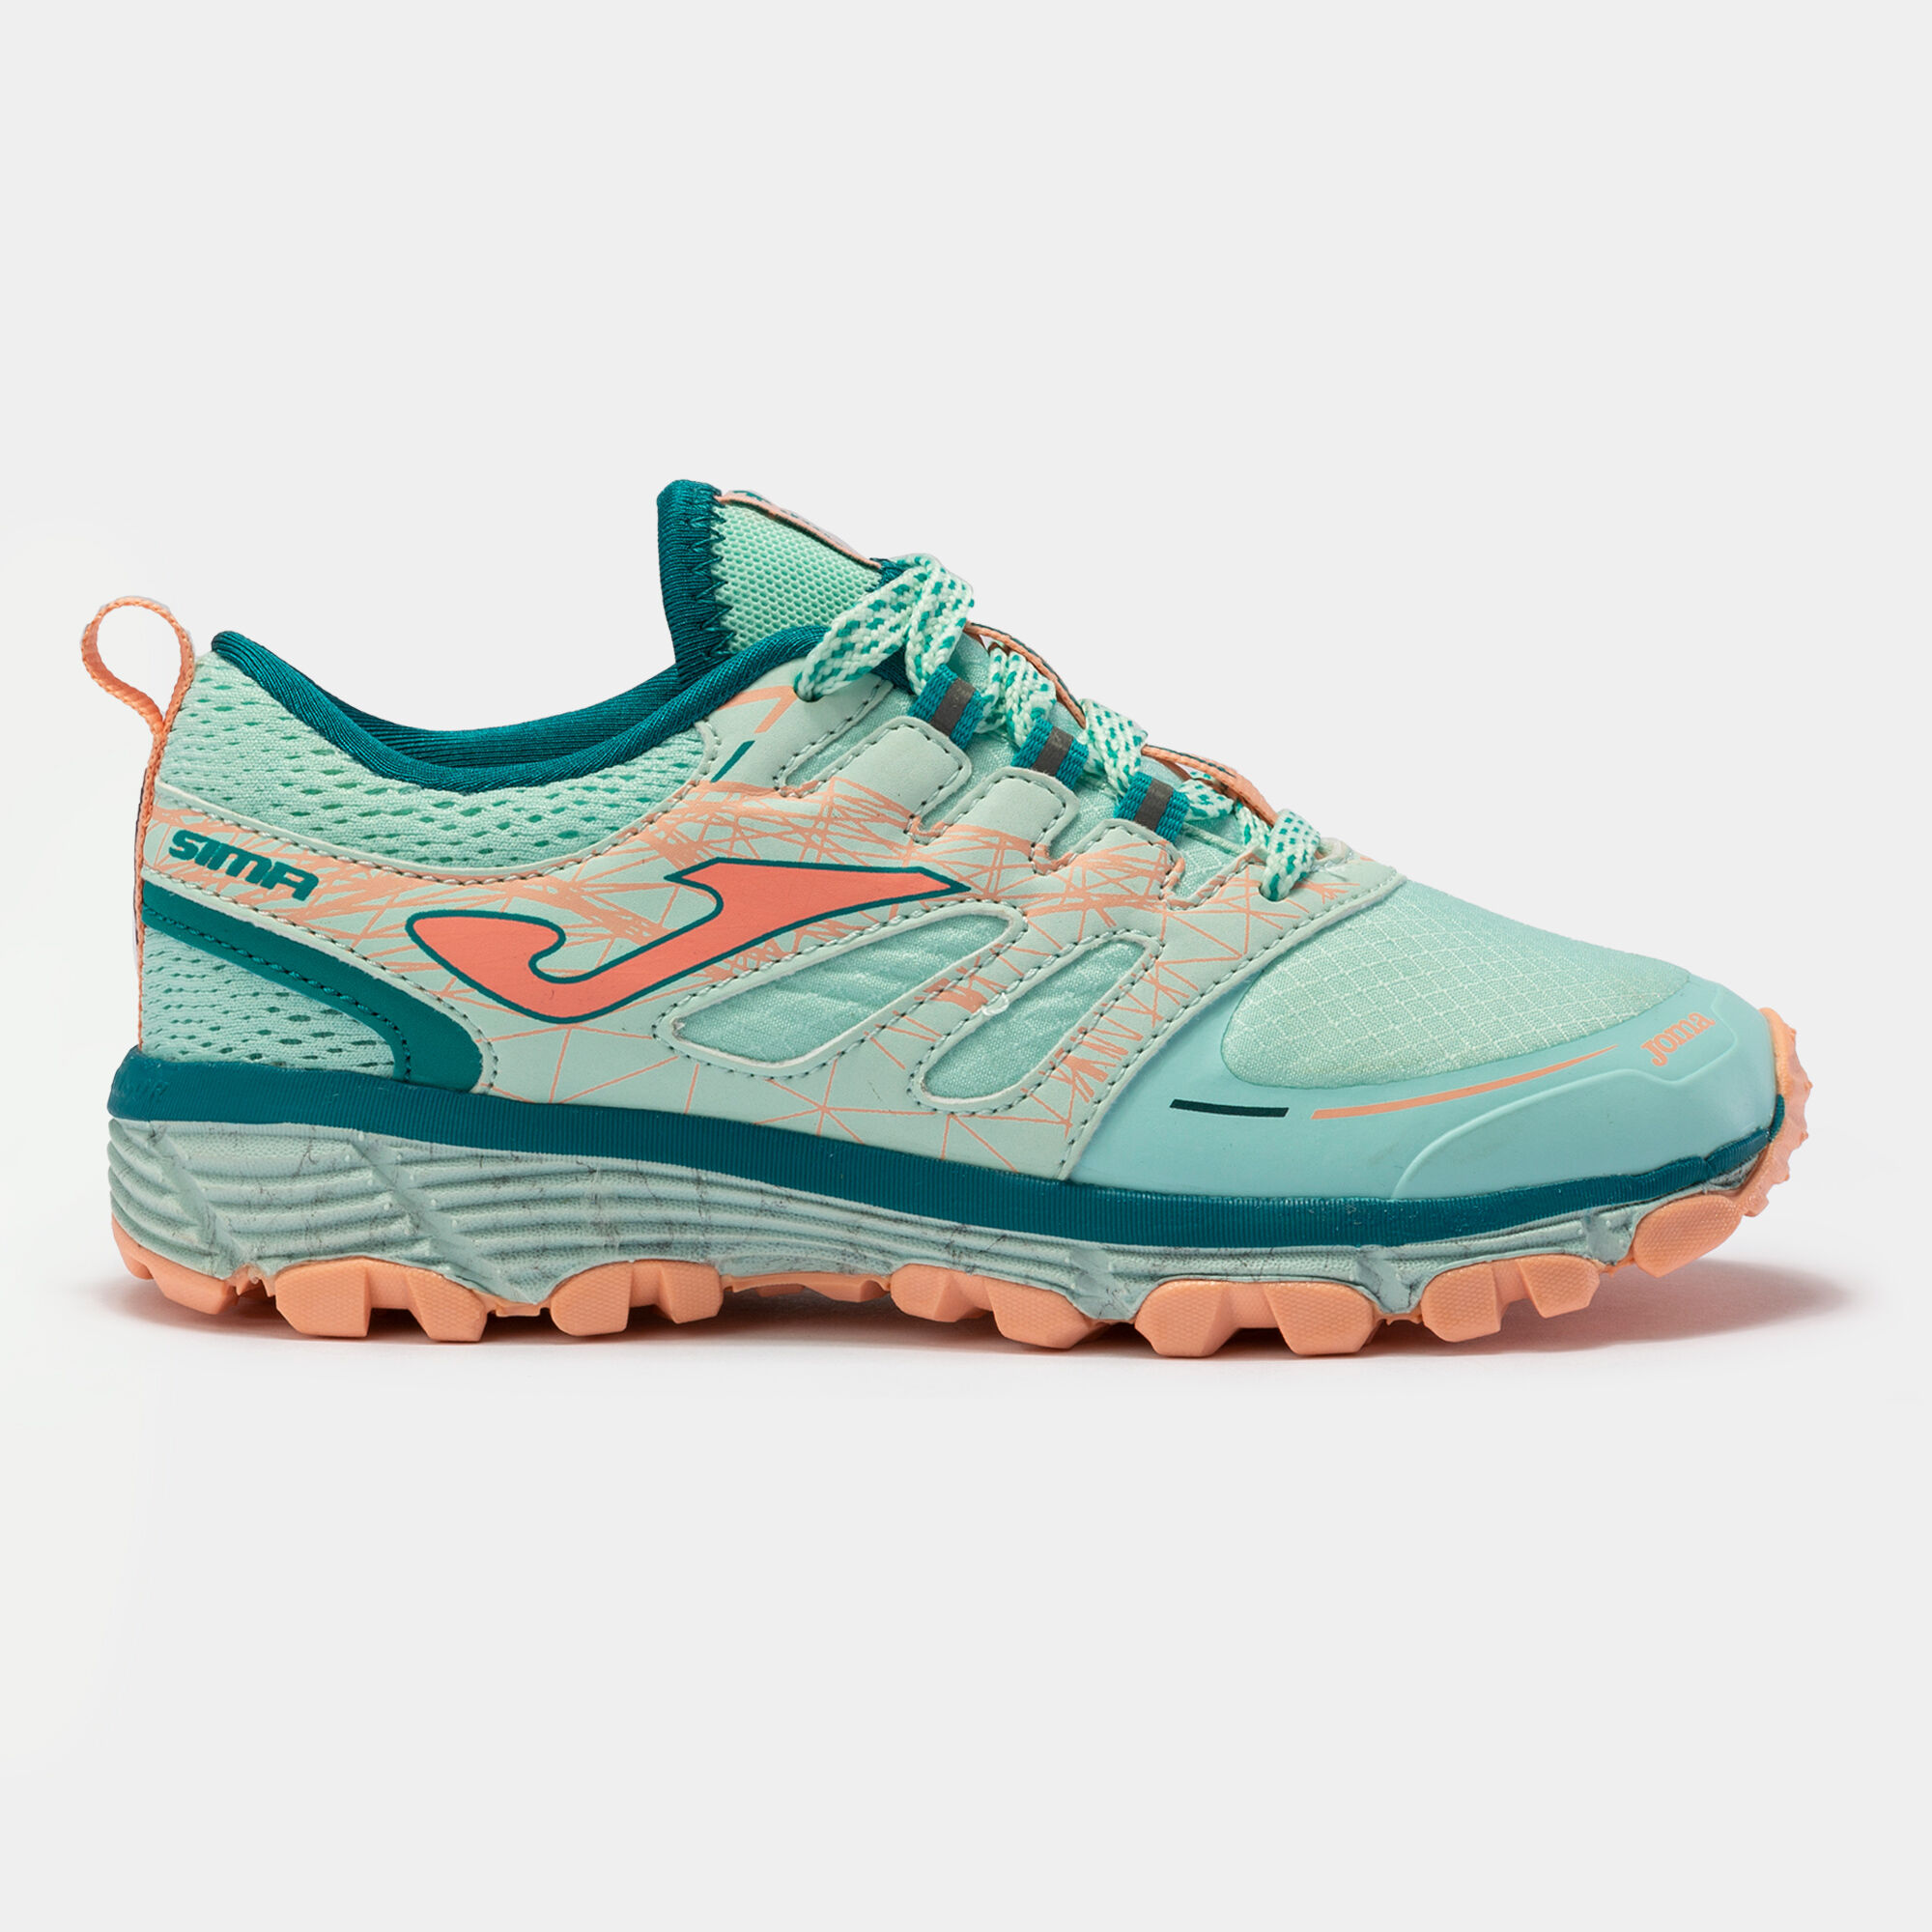 TRAIL-RUNNING SHOES SIMA 22 JUNIOR TURQUOISE